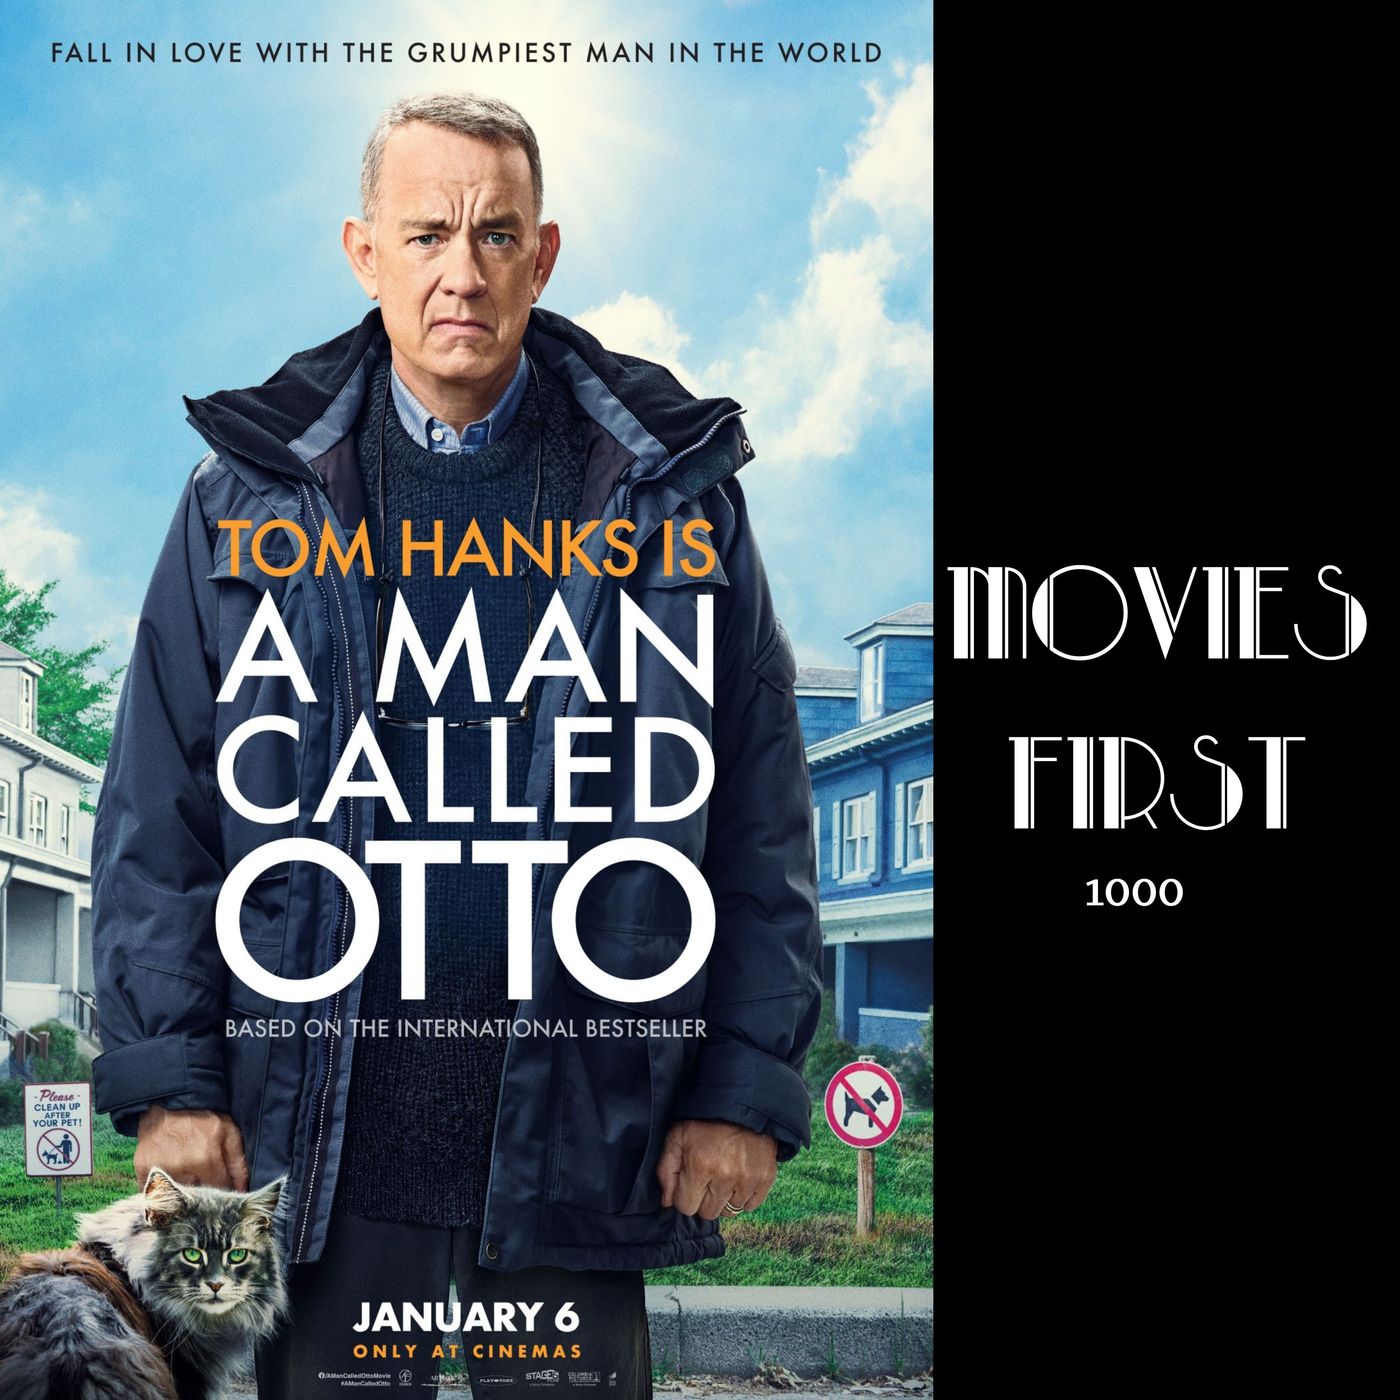 1000: A Man Called Otto (Comedy, Drama) (Review)